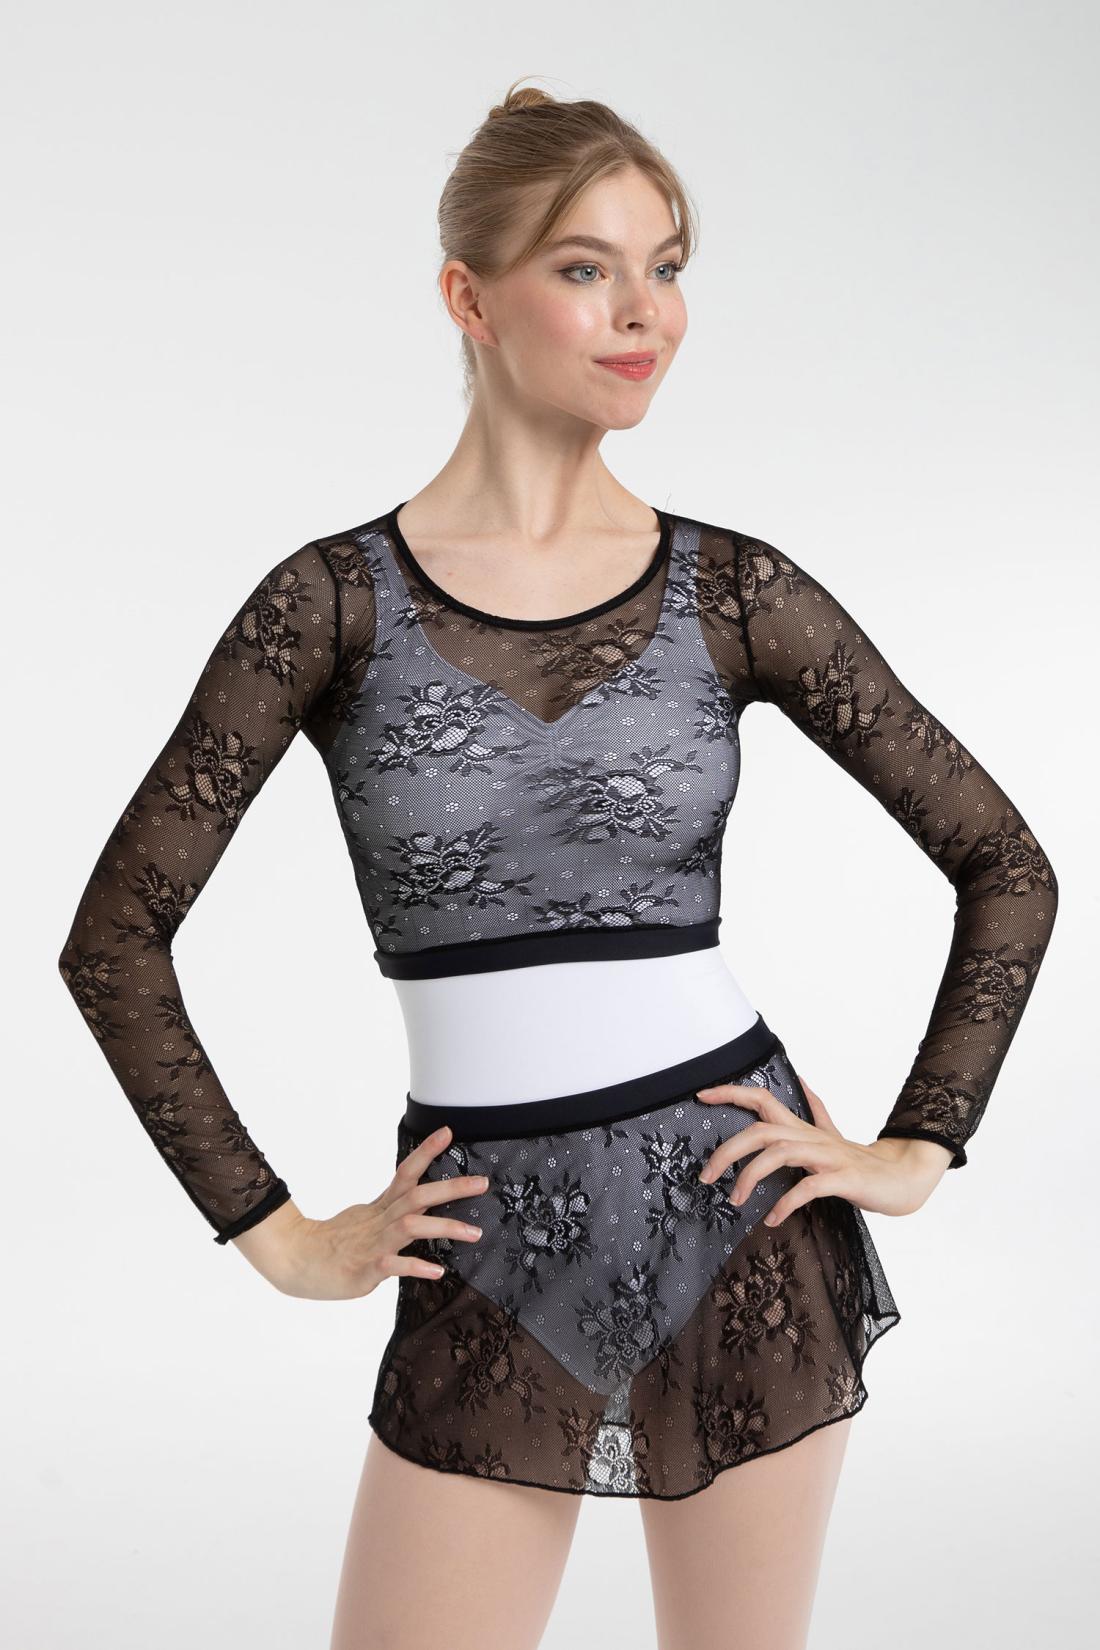 Afrodita Floral Lace Crop Top long sleeves with Meryl waistband for ballet dance Intermezzo